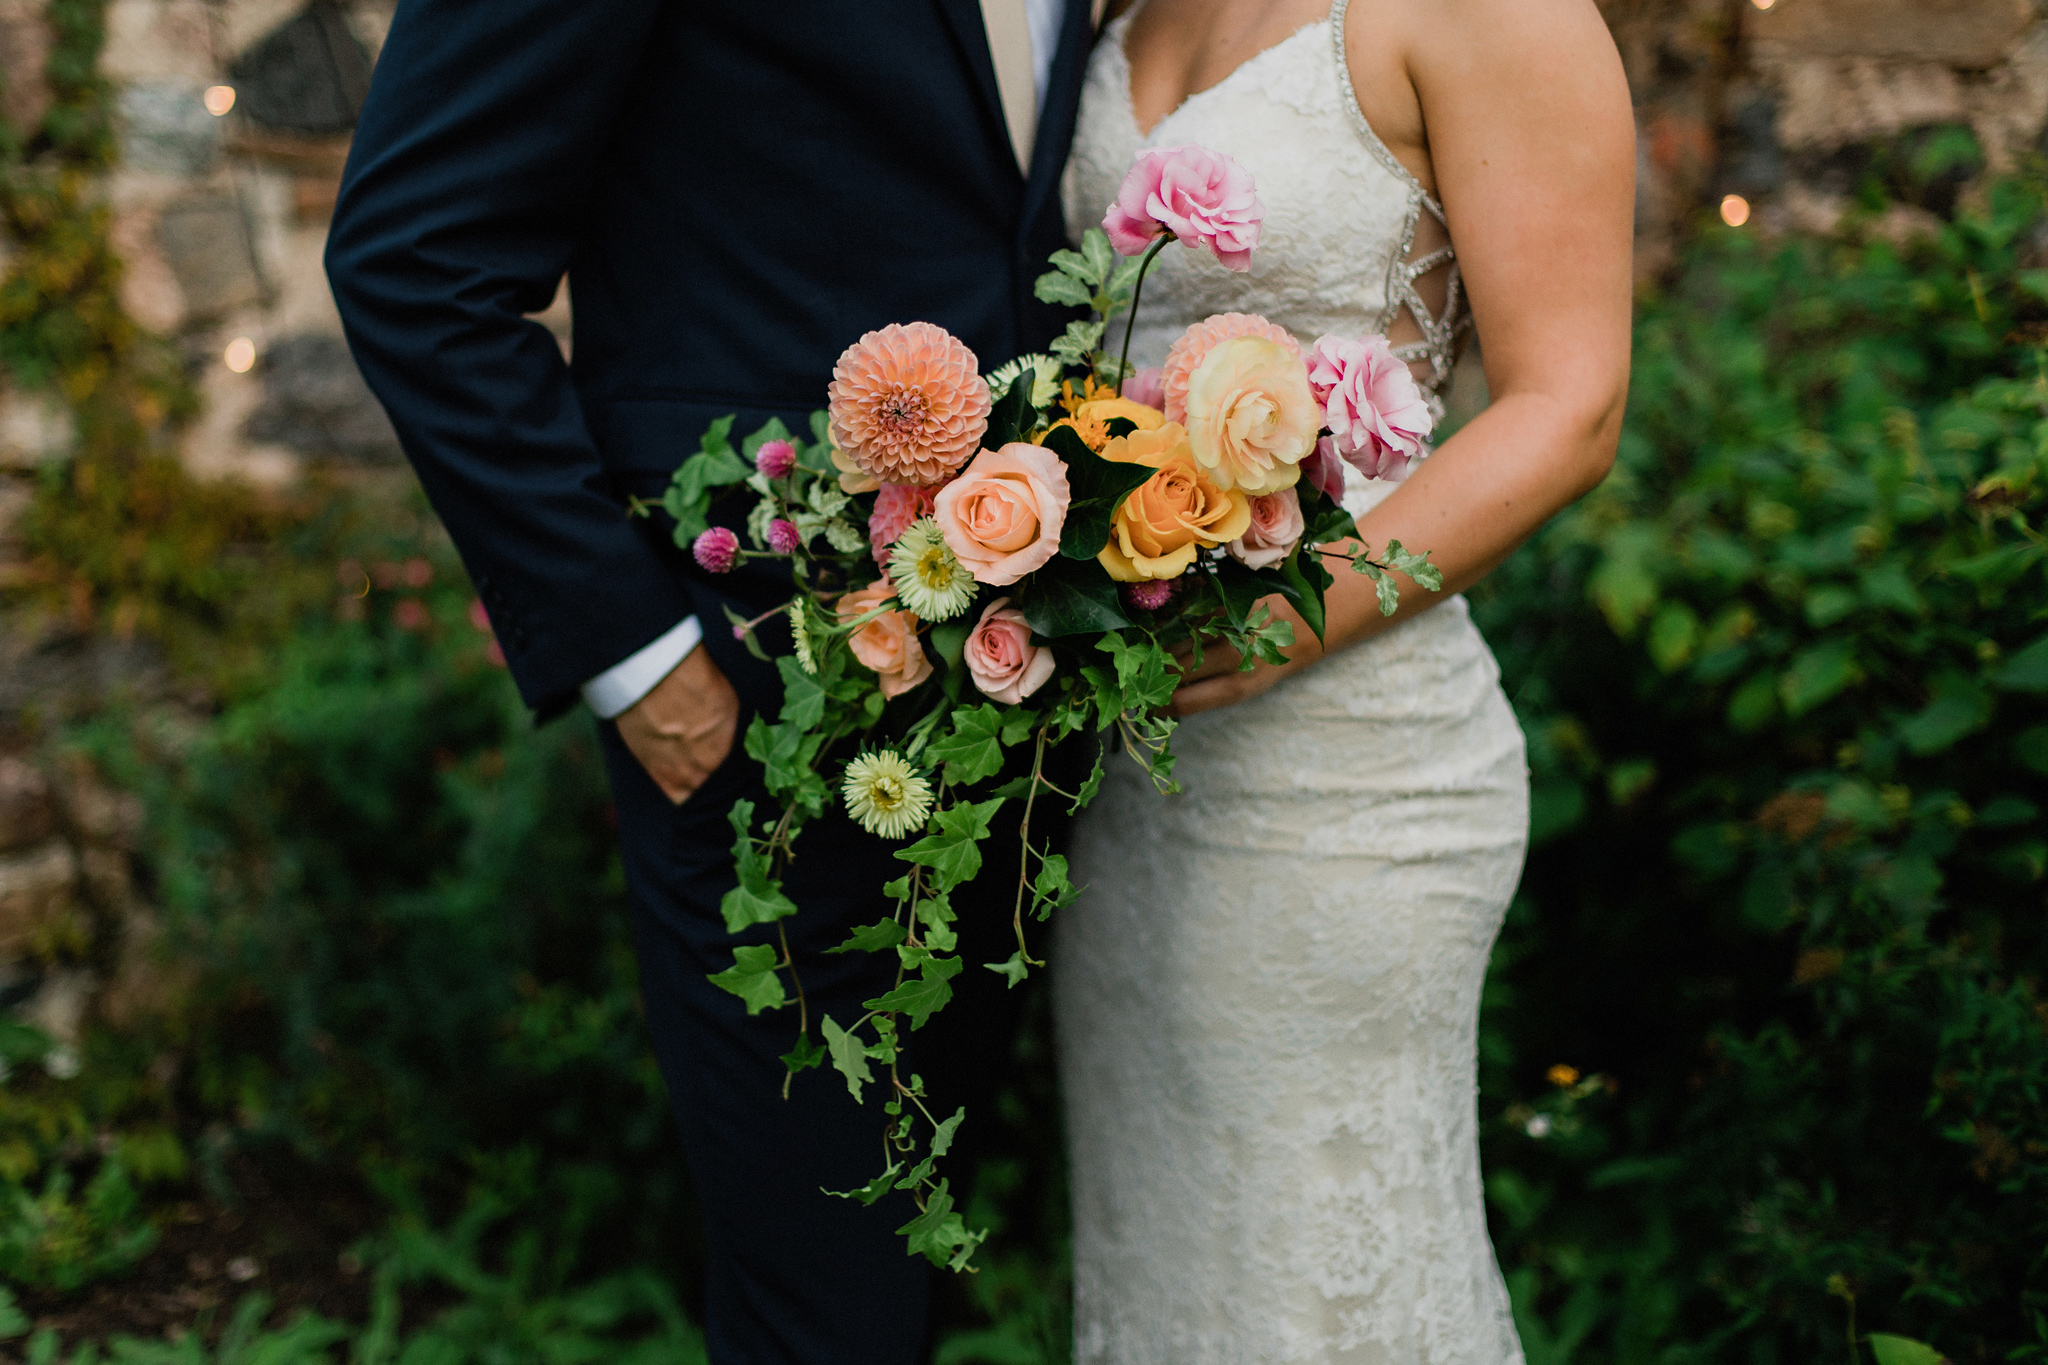 A sunset coral toned bridal bouquet with trailing ivy